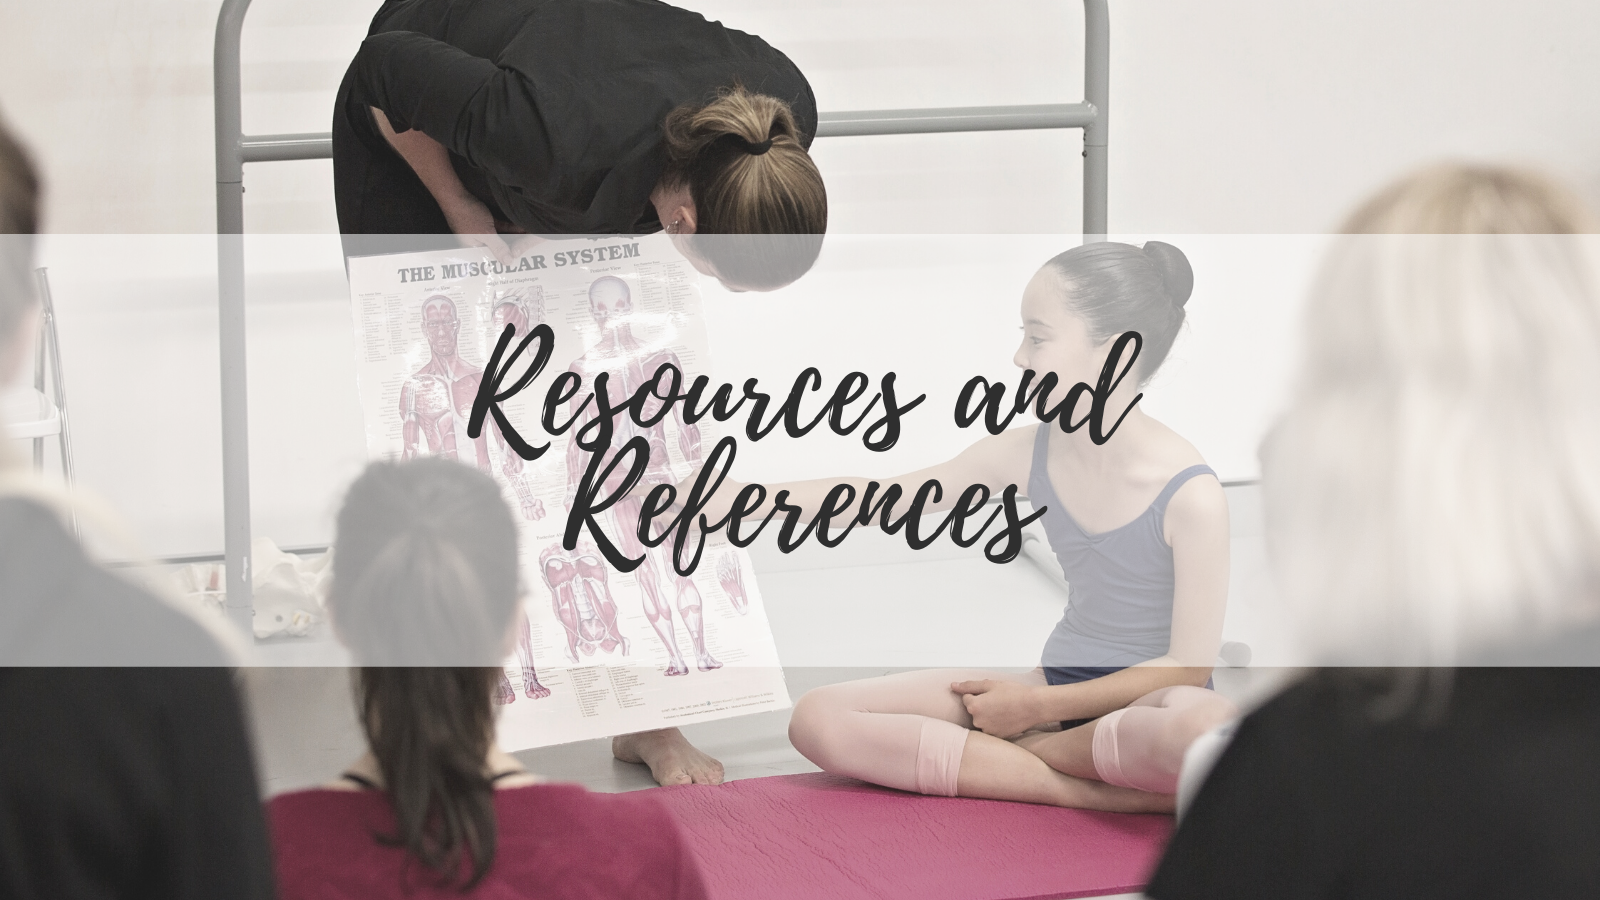 Resources and References - L1 Thumbnail - Teacher Training - Lisa Howell - The Ballet Blog